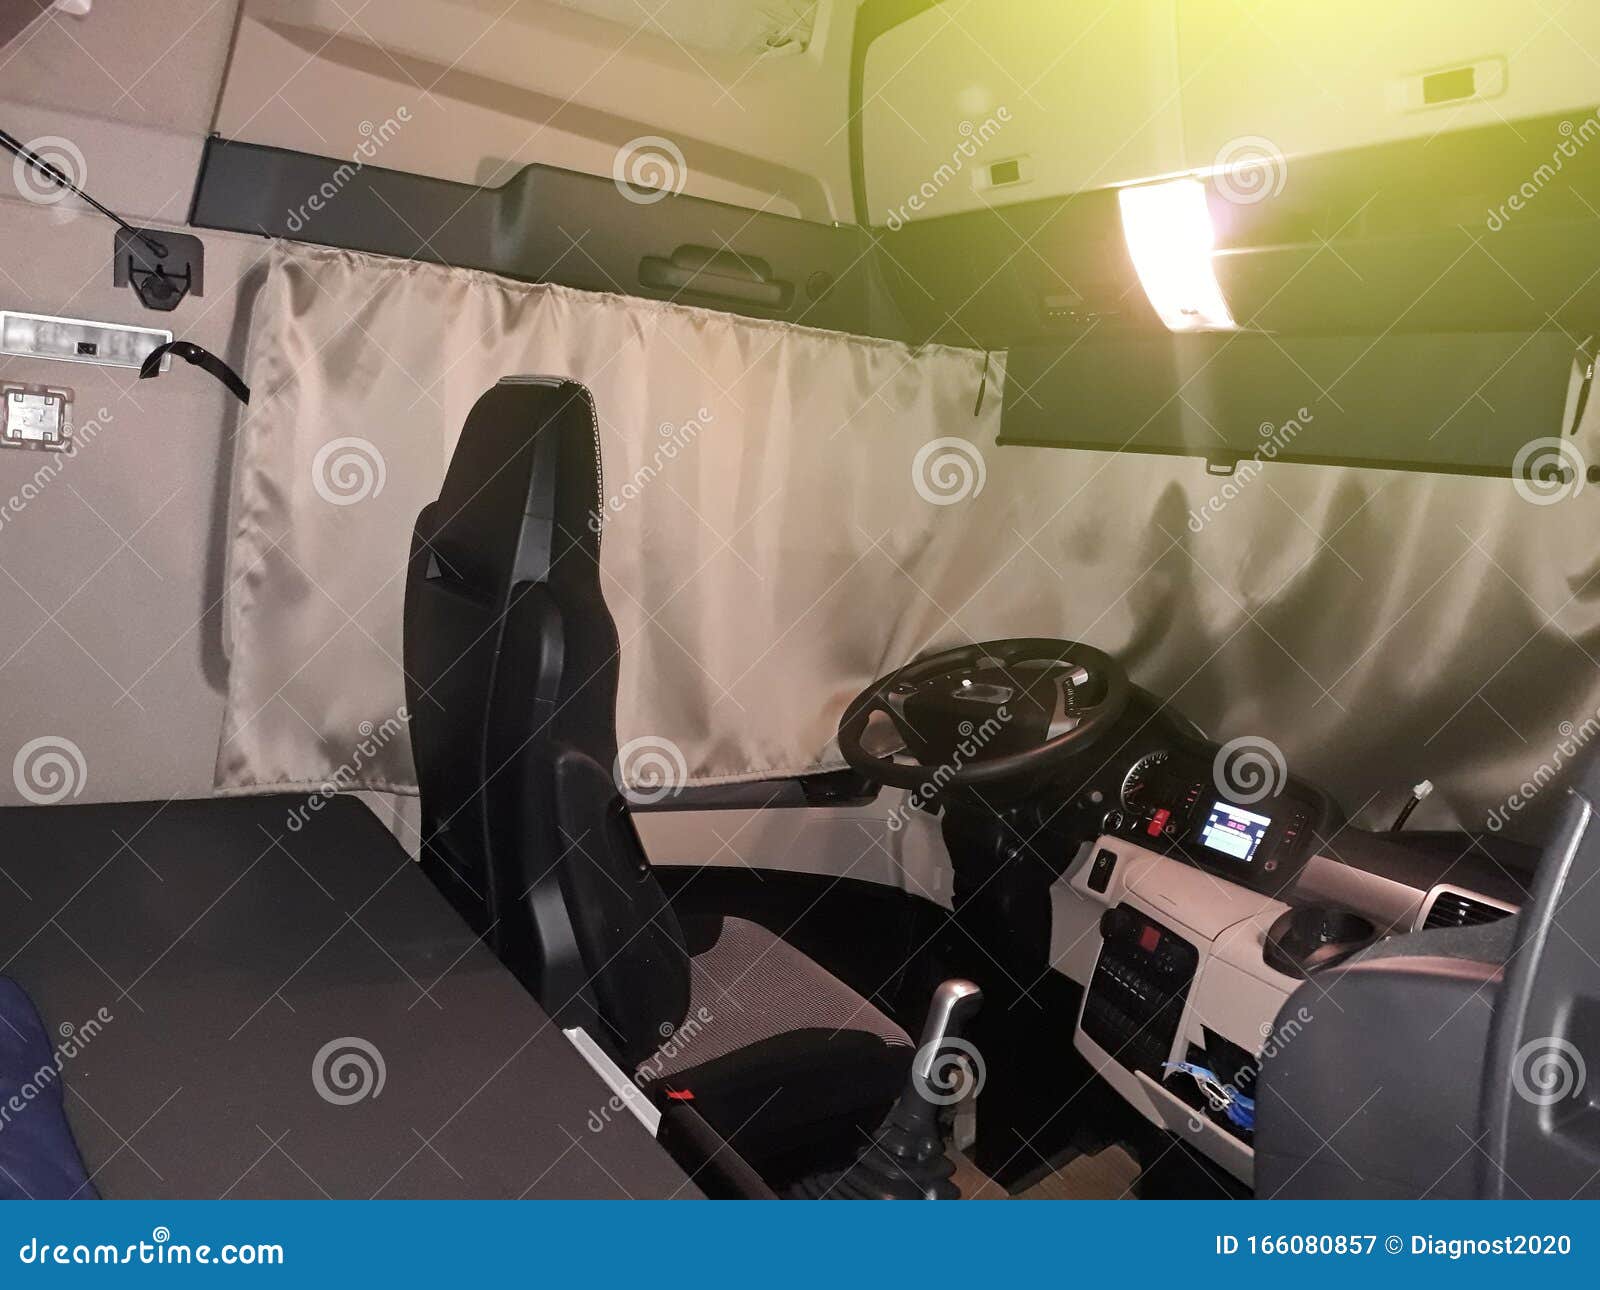 a truck driver is going to sleep in his cabin after working long hours on routes for a long time. the cab of the truck at night,